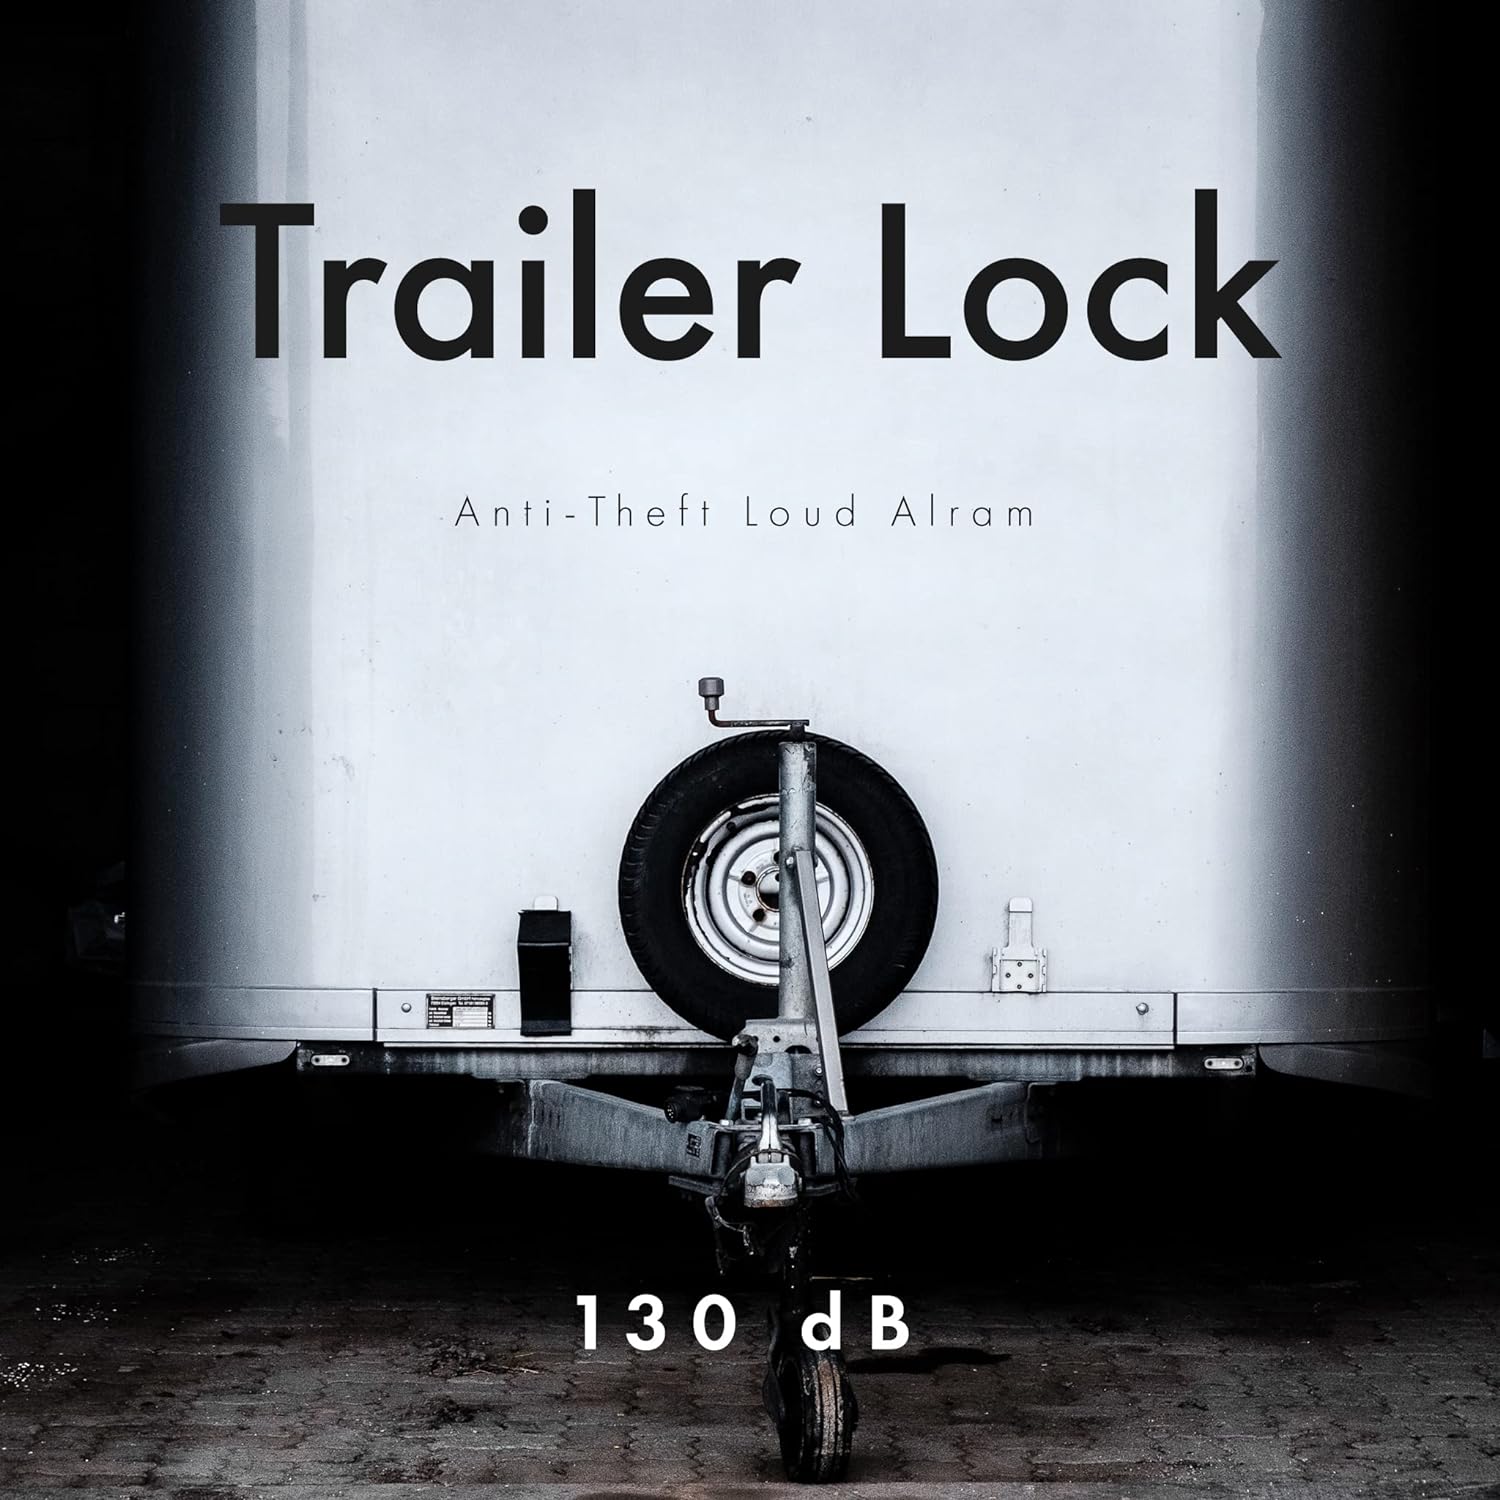 ALT tag: "Monochrome image of a trailer with the caption 'Trailer Lock - Anti-Theft Loud Alarm' and '130 dB' indicating the alarm volume, suggesting robust security for vehicle trailers